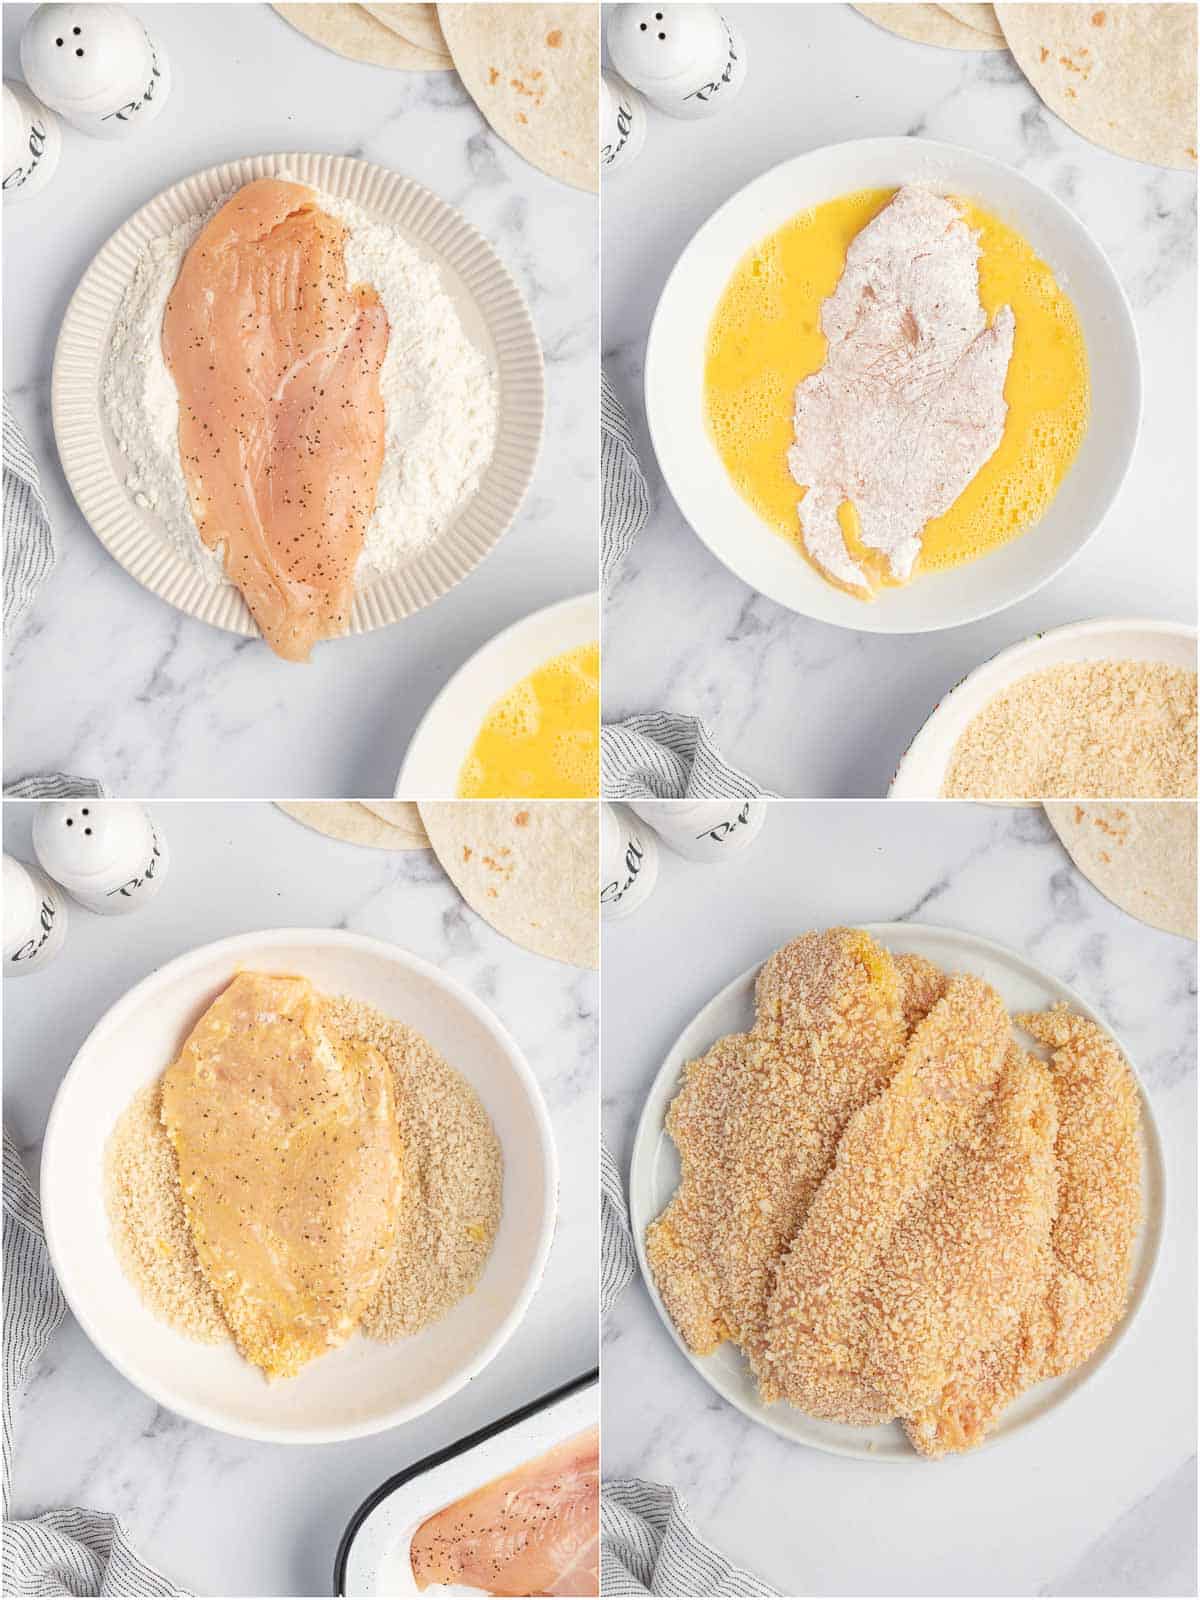 How to dredge chicken for pan frying.